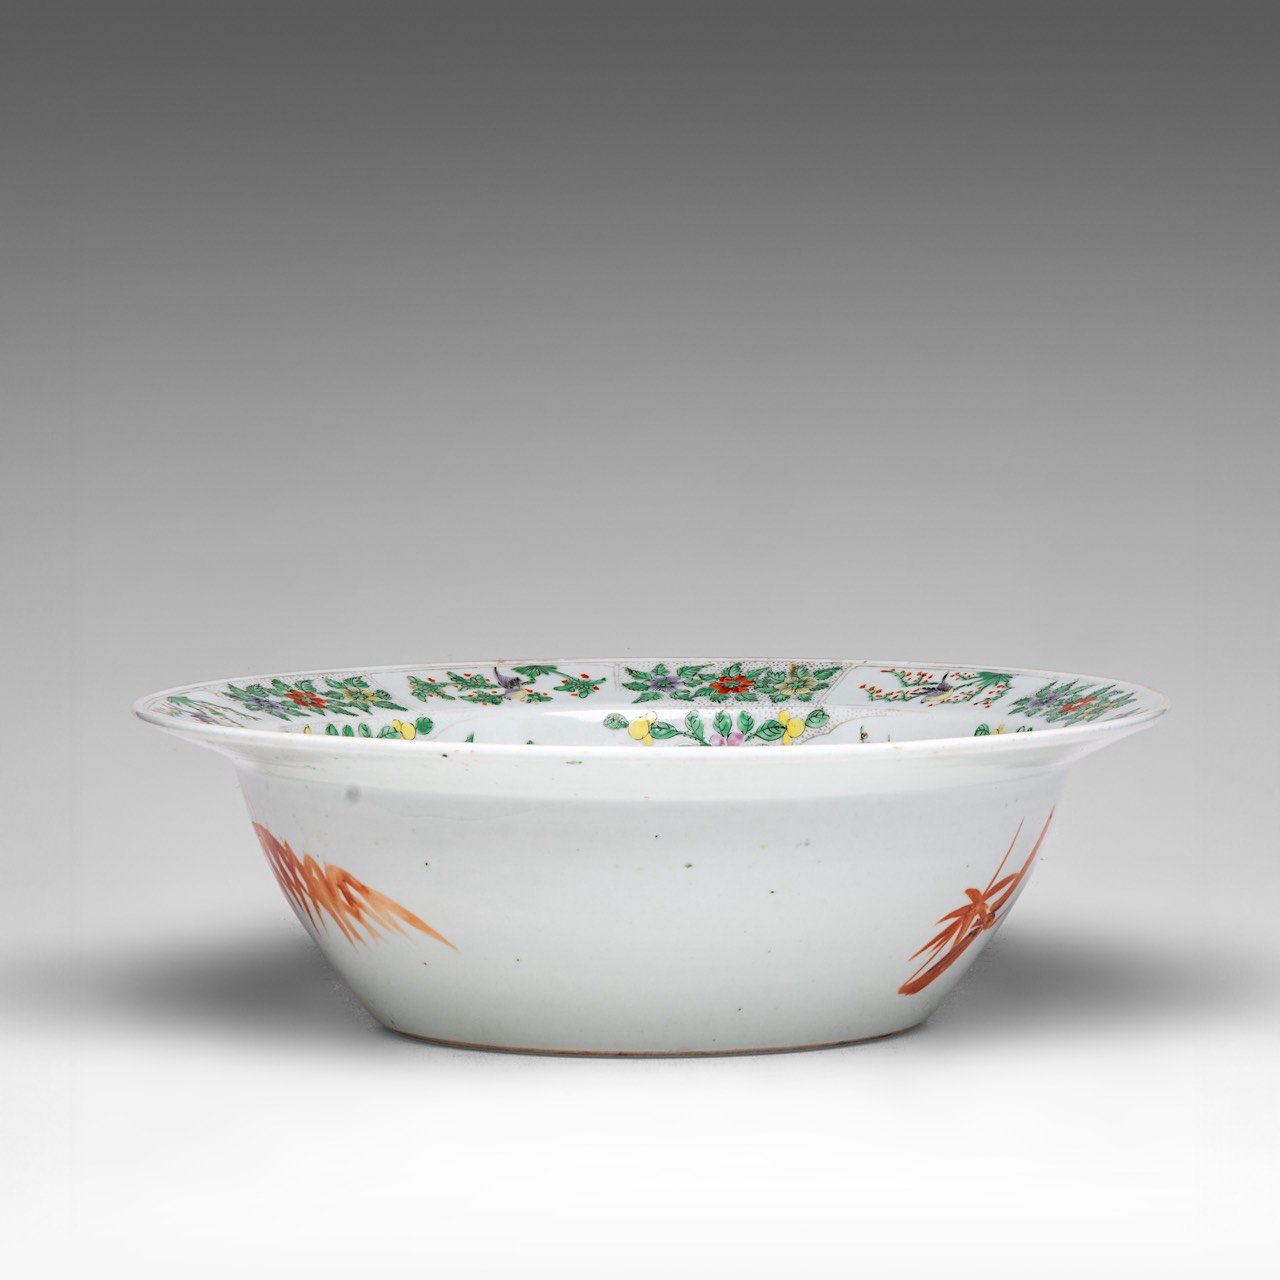 A Chinese Qianjiangcai 'Ladies in a chamber' basin bowl, late 19thC, dia 37,5 - H 11,8 cm - Image 5 of 7